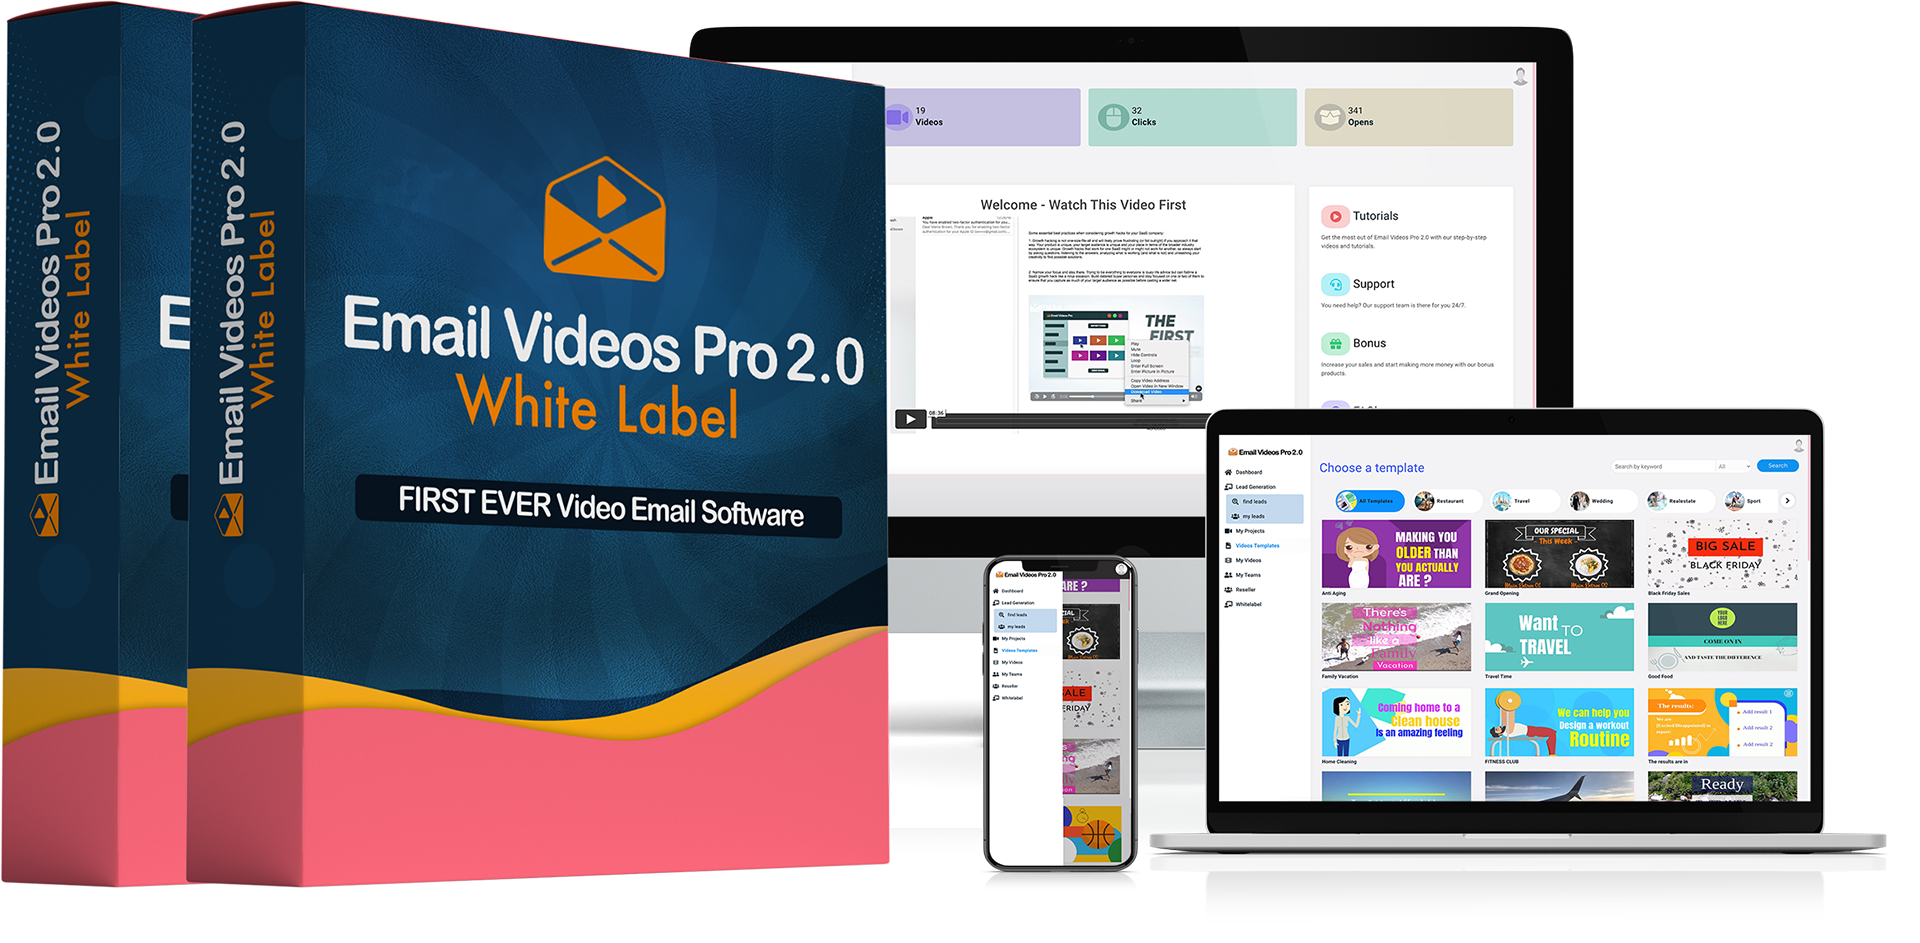 Email Videos Pro 2.0